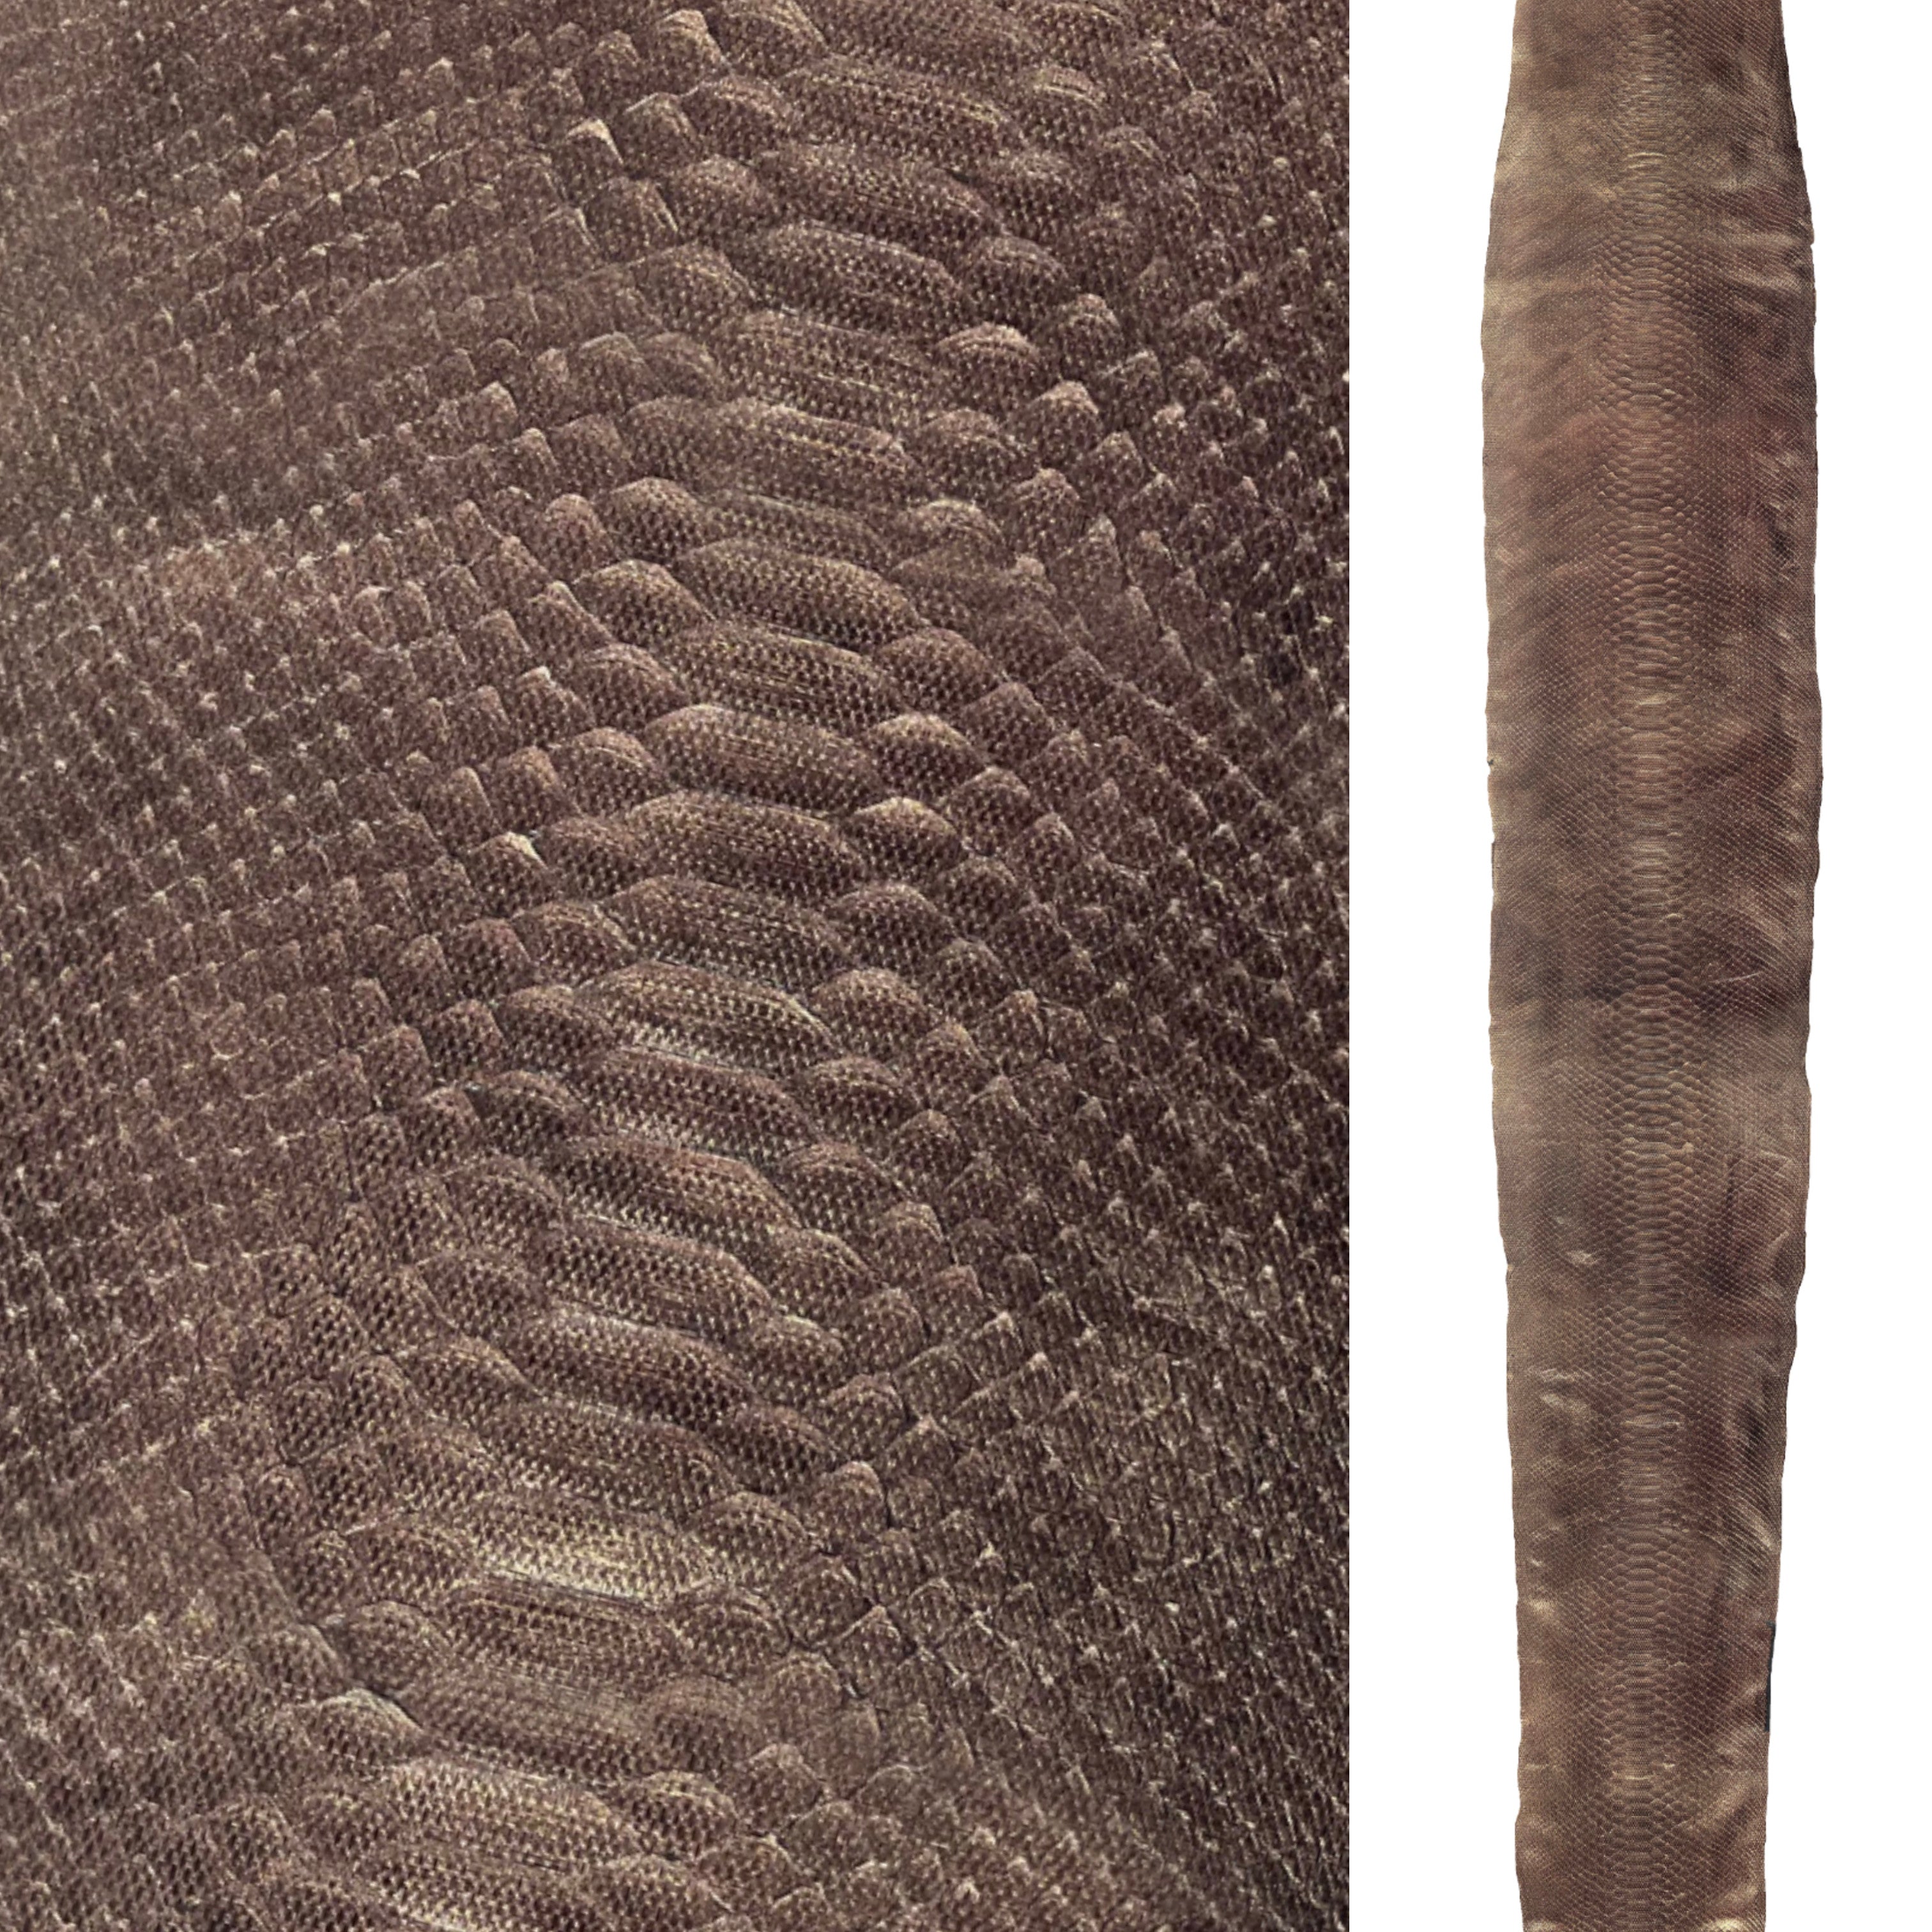 Leather, Leather Fabric, Alligator Leather, Exotic Leather, Python  Leather